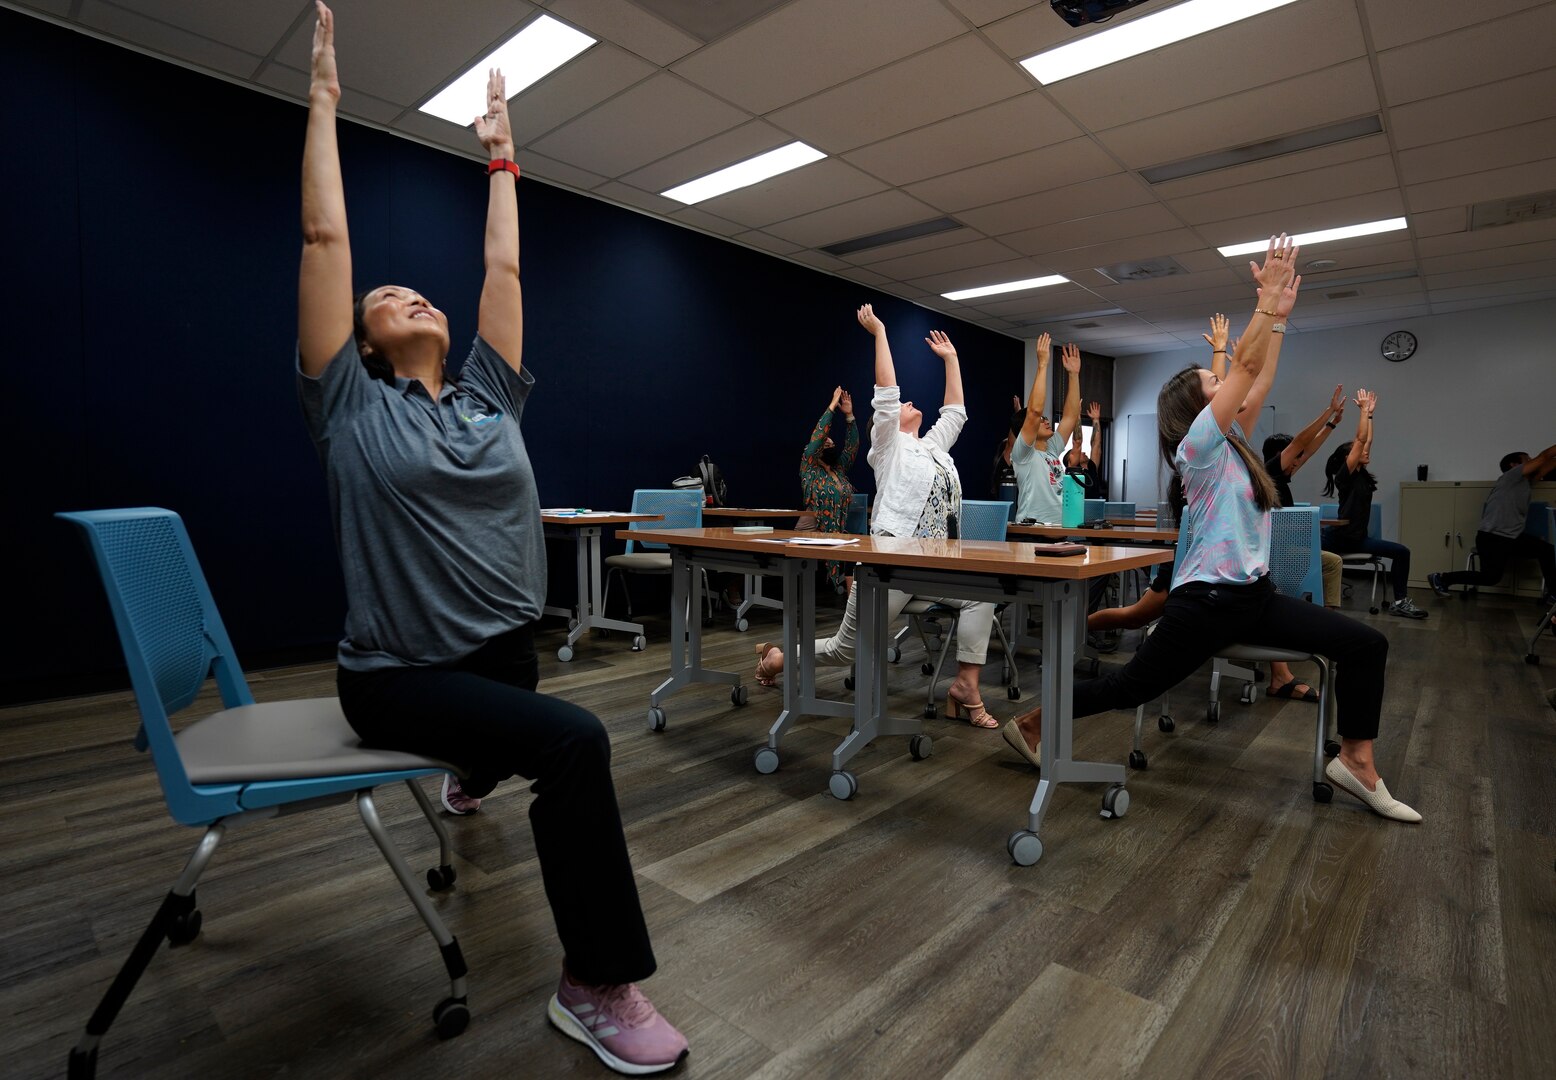 Mae Lynne from Kaiser Permanete, left, leads shipyard personnel through a yoga flow during a chair yoga stretch class at Pearl Harbor Naval Shipyard.